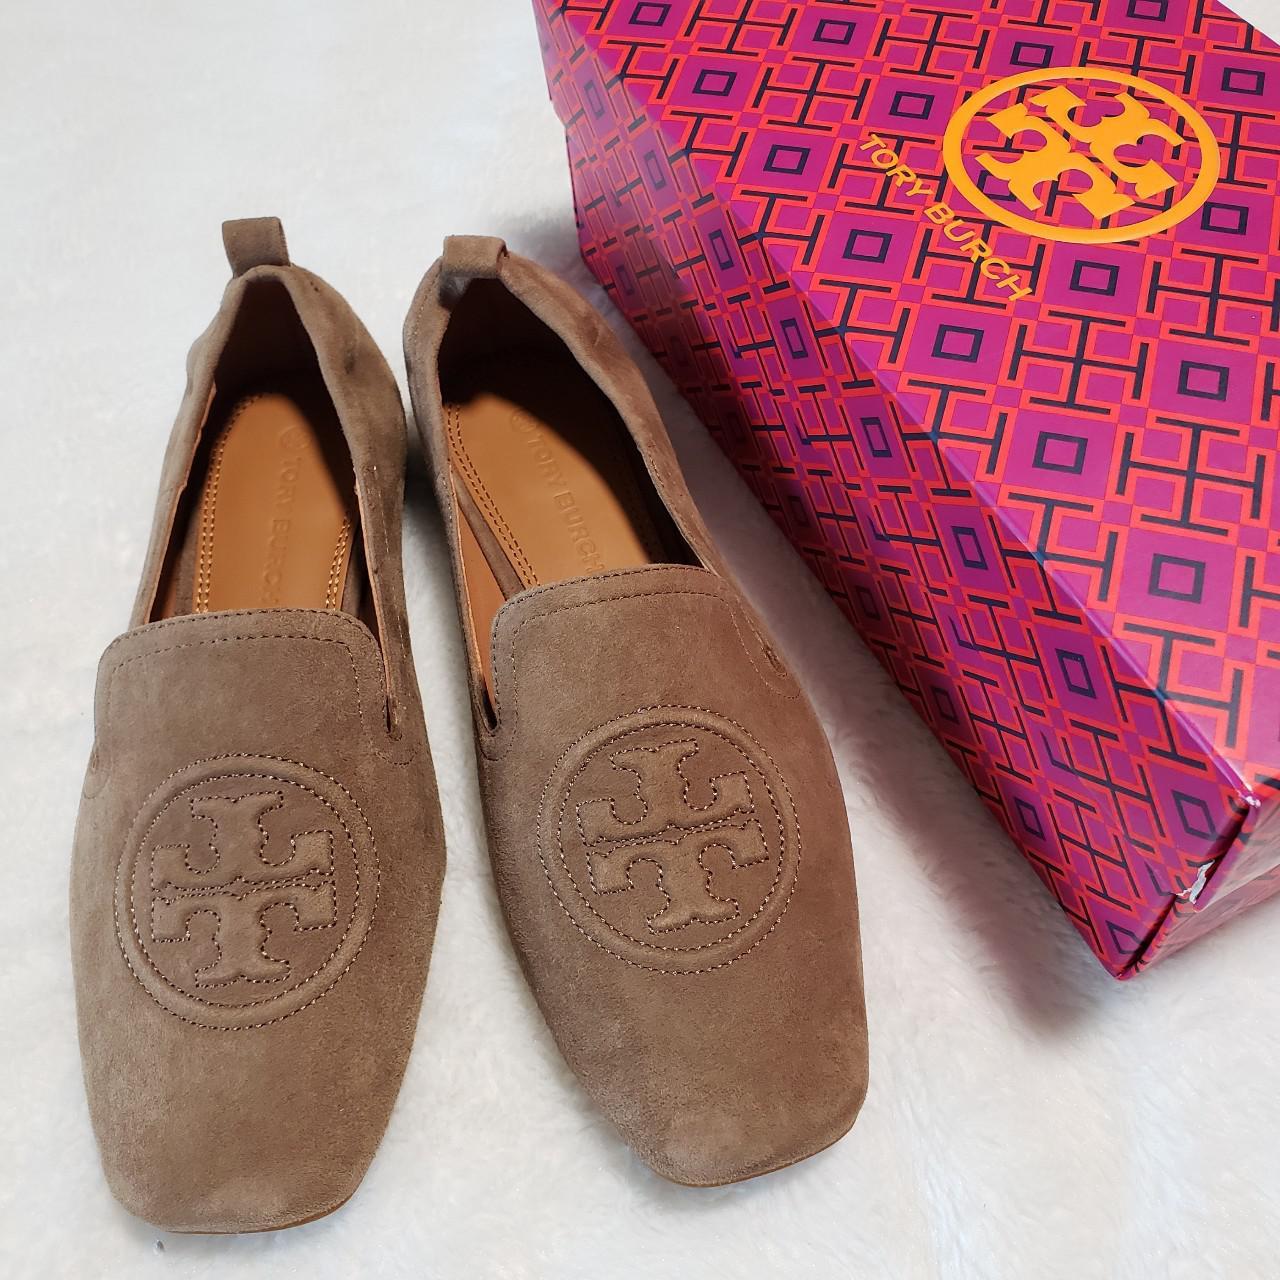 Tory Burch Women's Brown and Tan Loafers | Depop